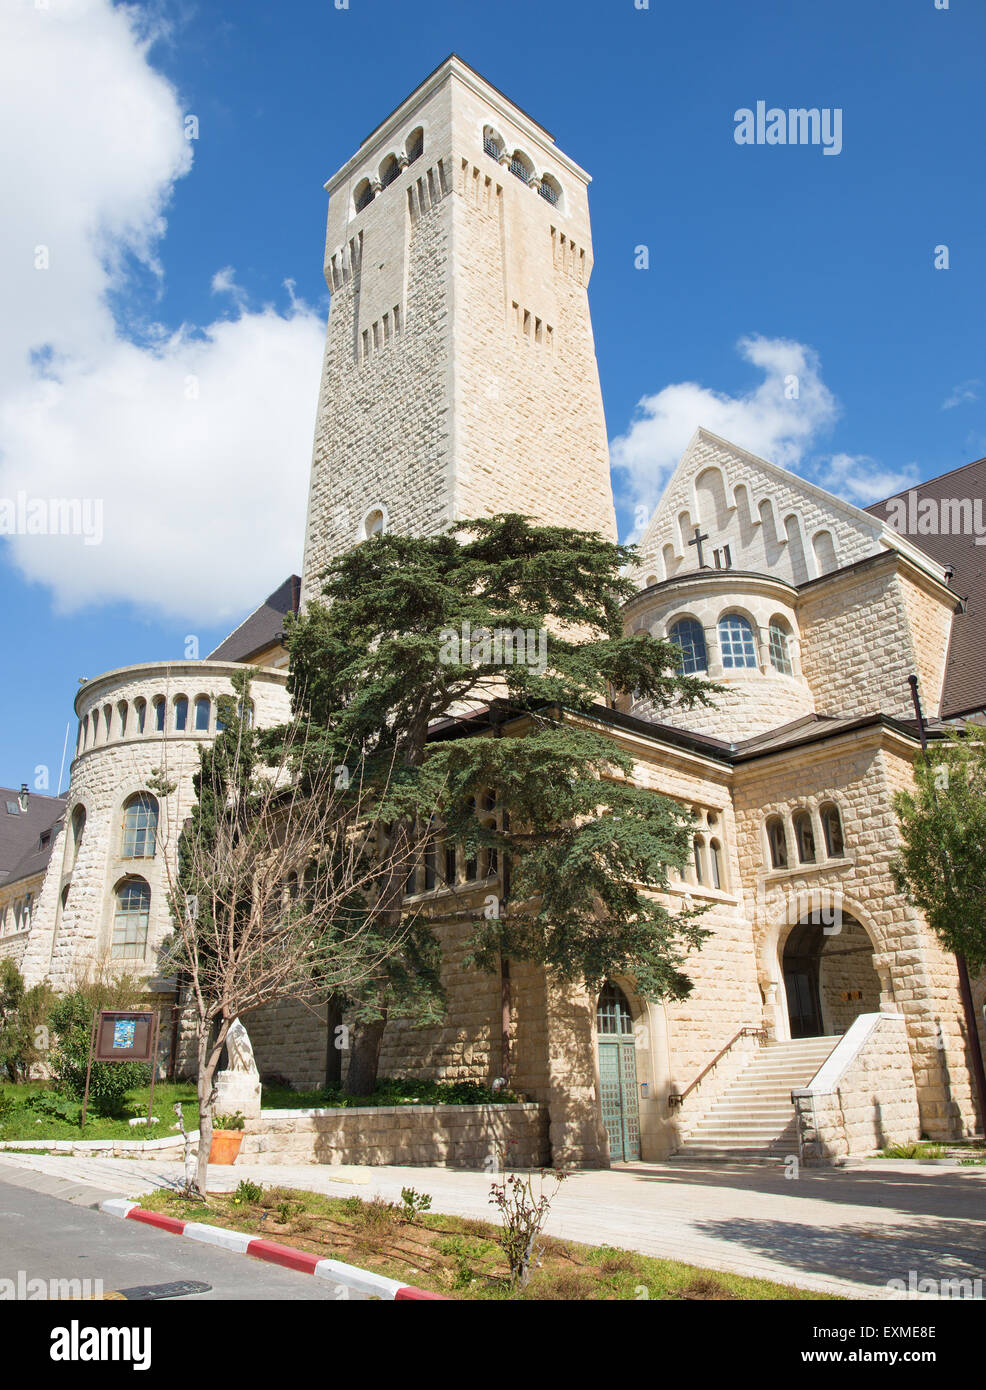 Jerusalem - Evangelical Lutheran Church of Ascension on The Mount of Olives. Stock Photo